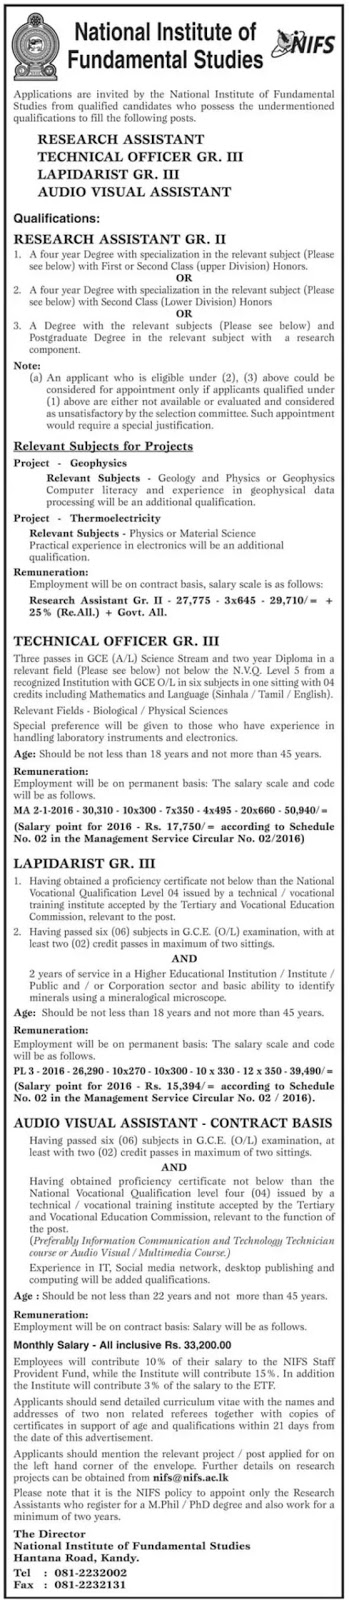 Research Assistant / Technical Officer / Lapidarist Vacancies in NIFS